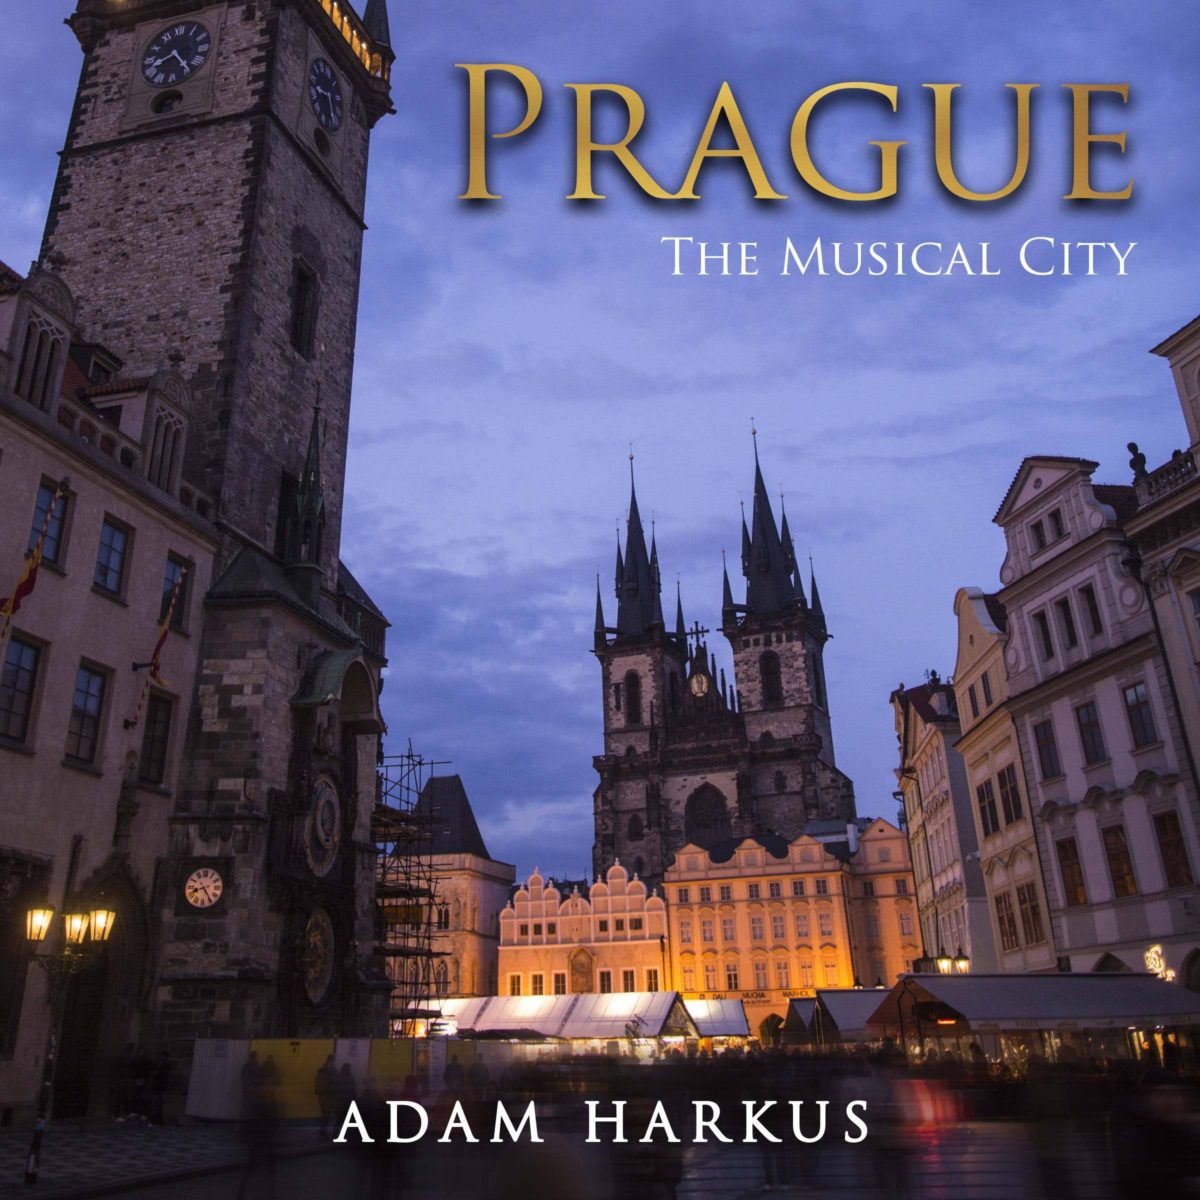 Prague: The Musical City. Out Now on eBook & Paperback!